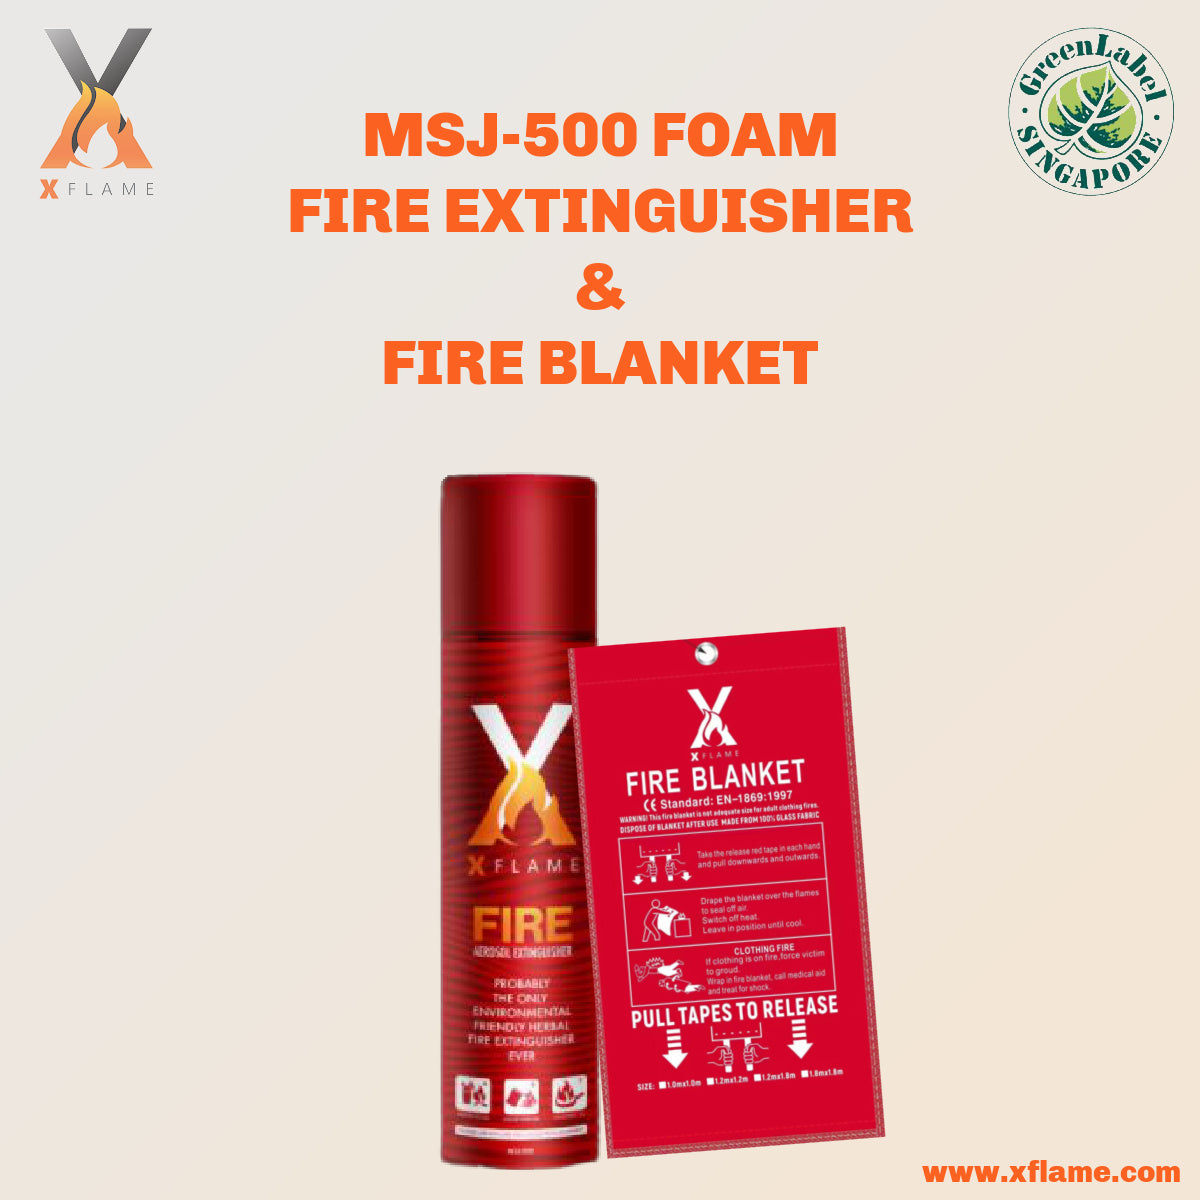 XFLAME MSJ-500 Fire Extinguisher with Fire Blanket